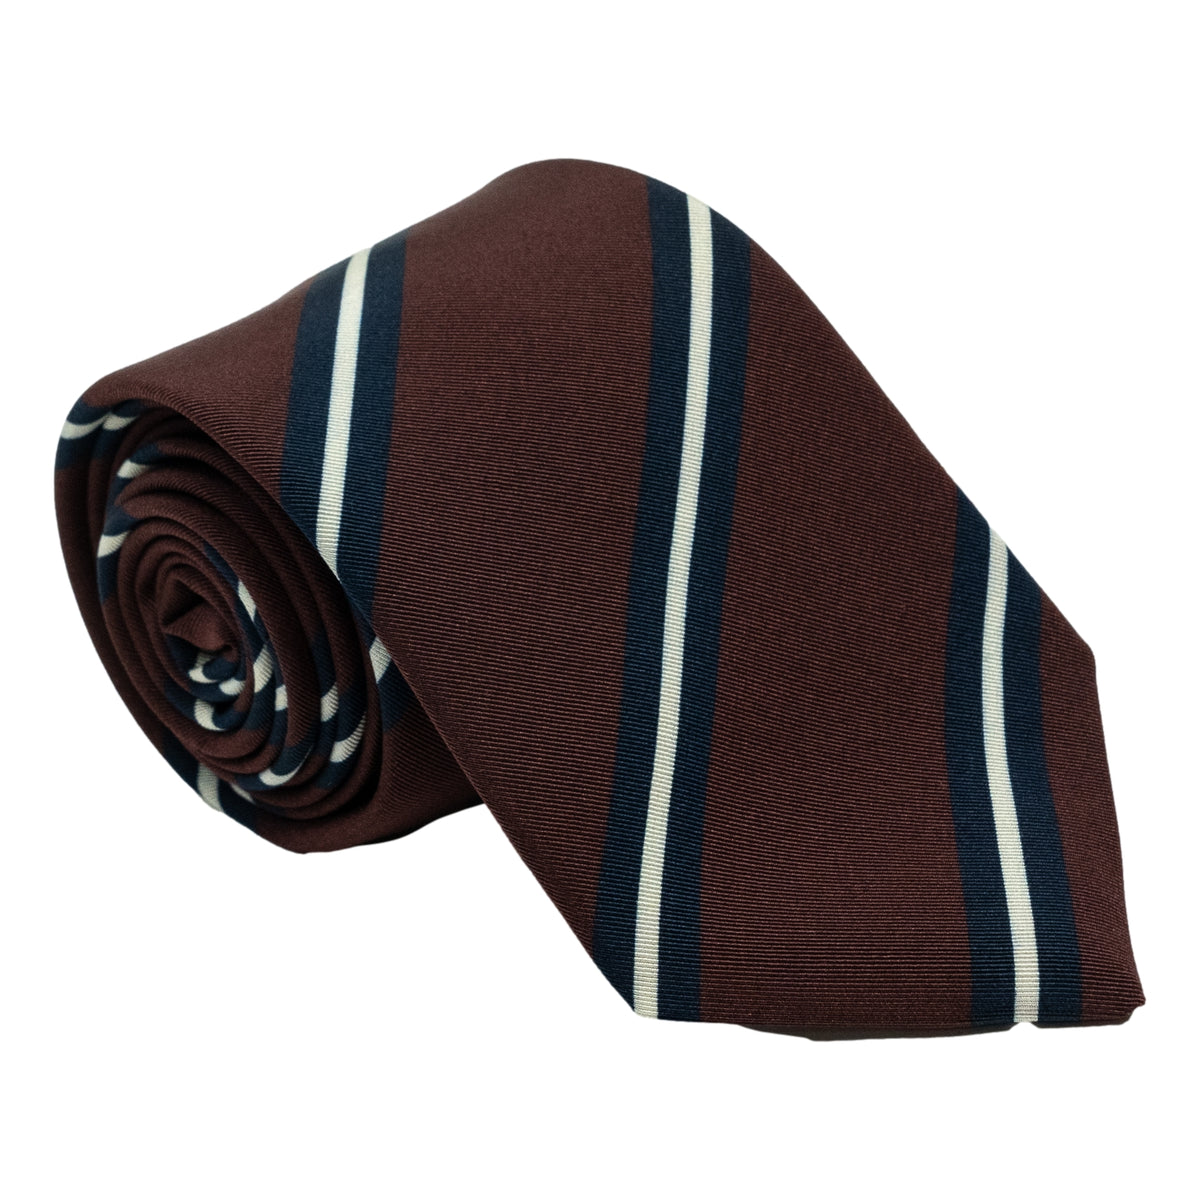 Maroon with Navy and White Striped Irish Poplin Tie – The Andover Shop